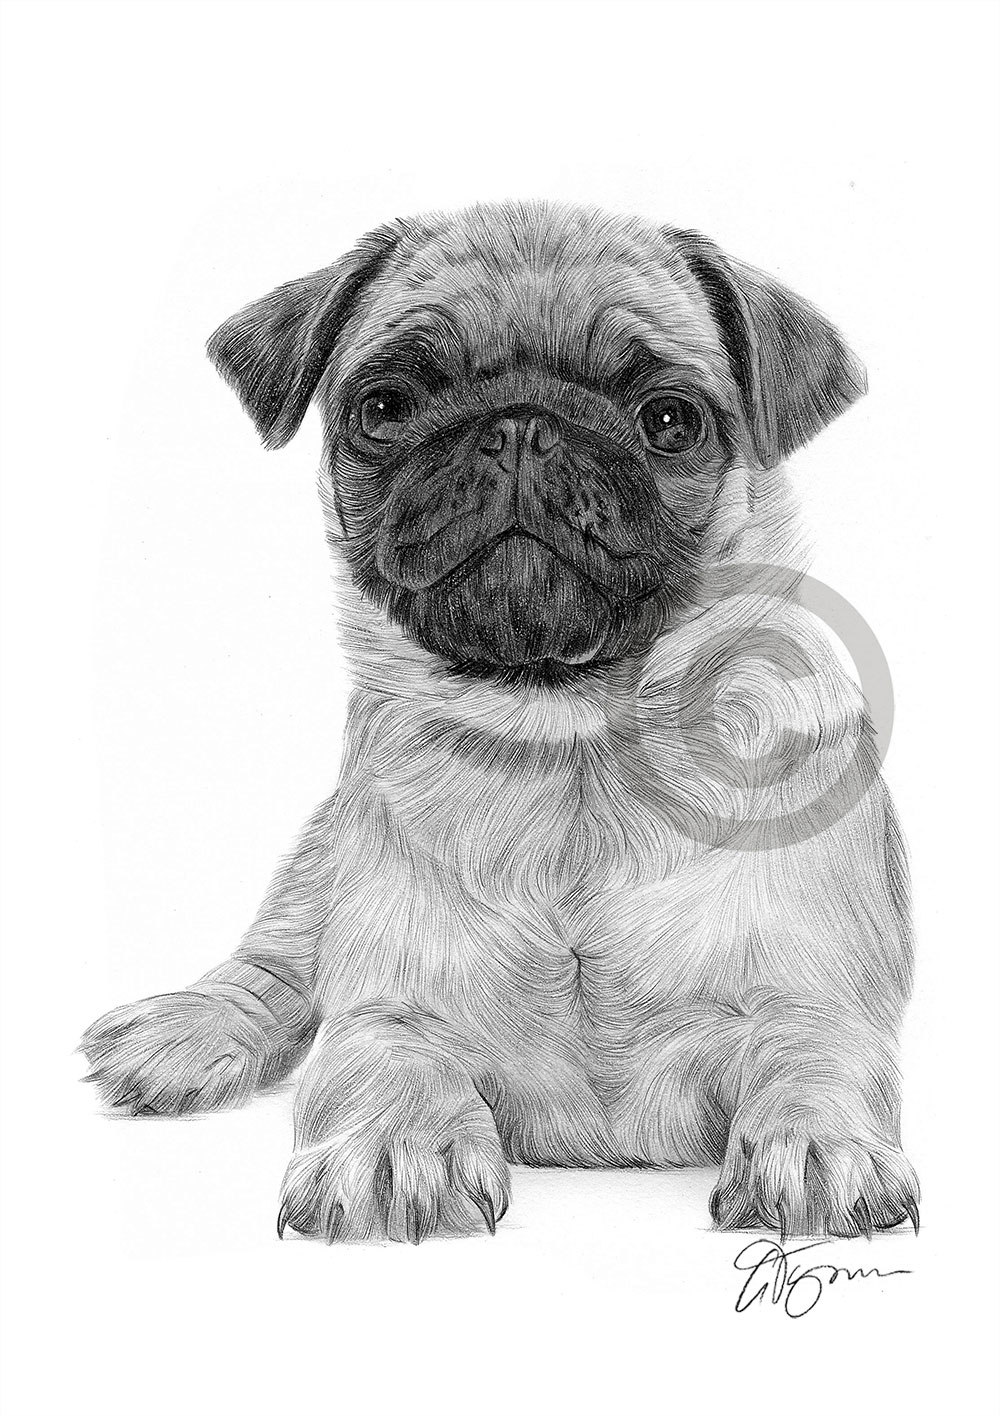 Pencil drawing of a Pug puppy by artist Gary Tymon